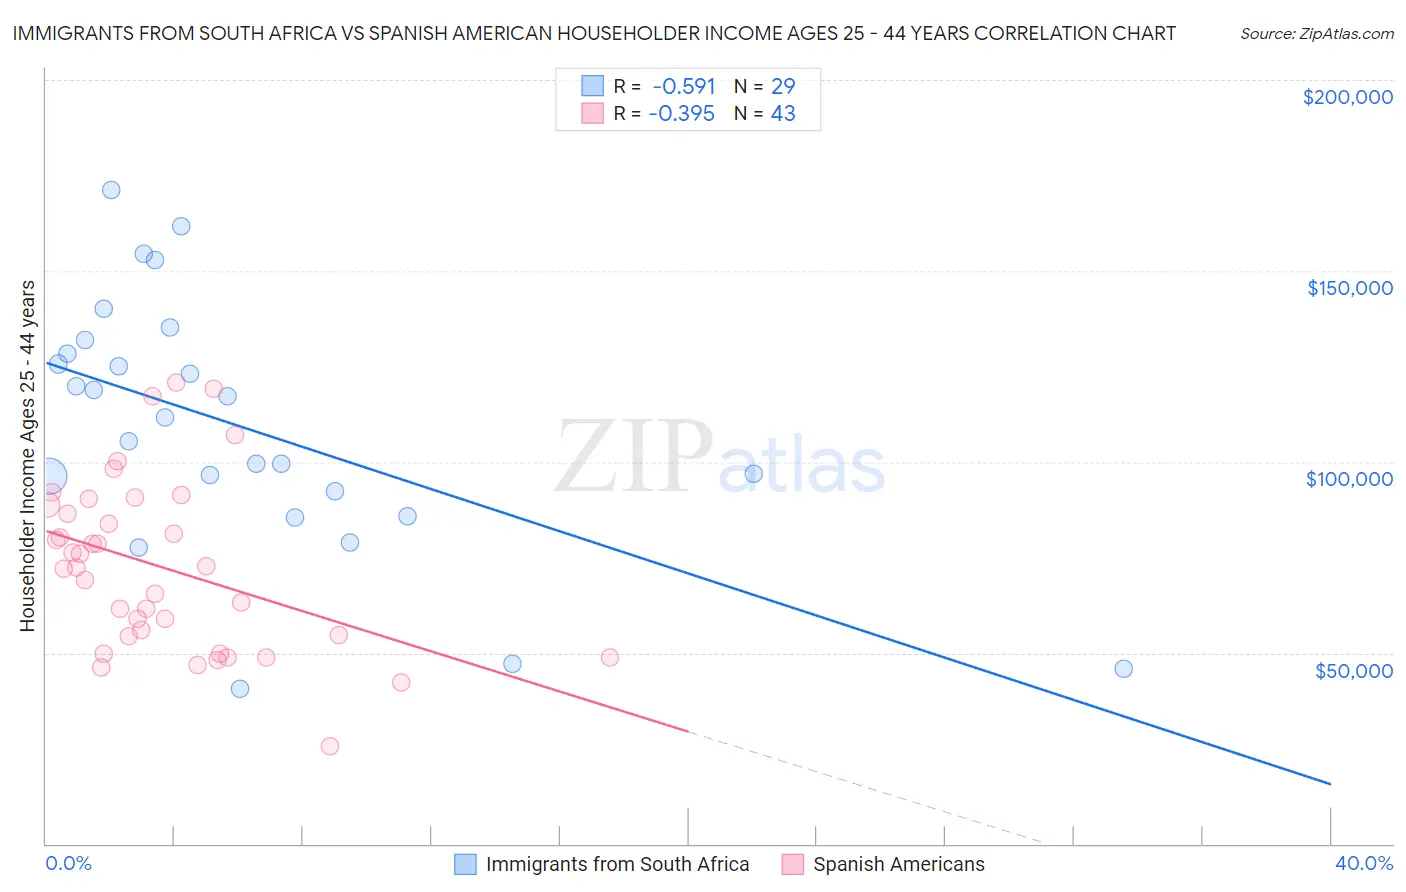 Immigrants from South Africa vs Spanish American Householder Income Ages 25 - 44 years